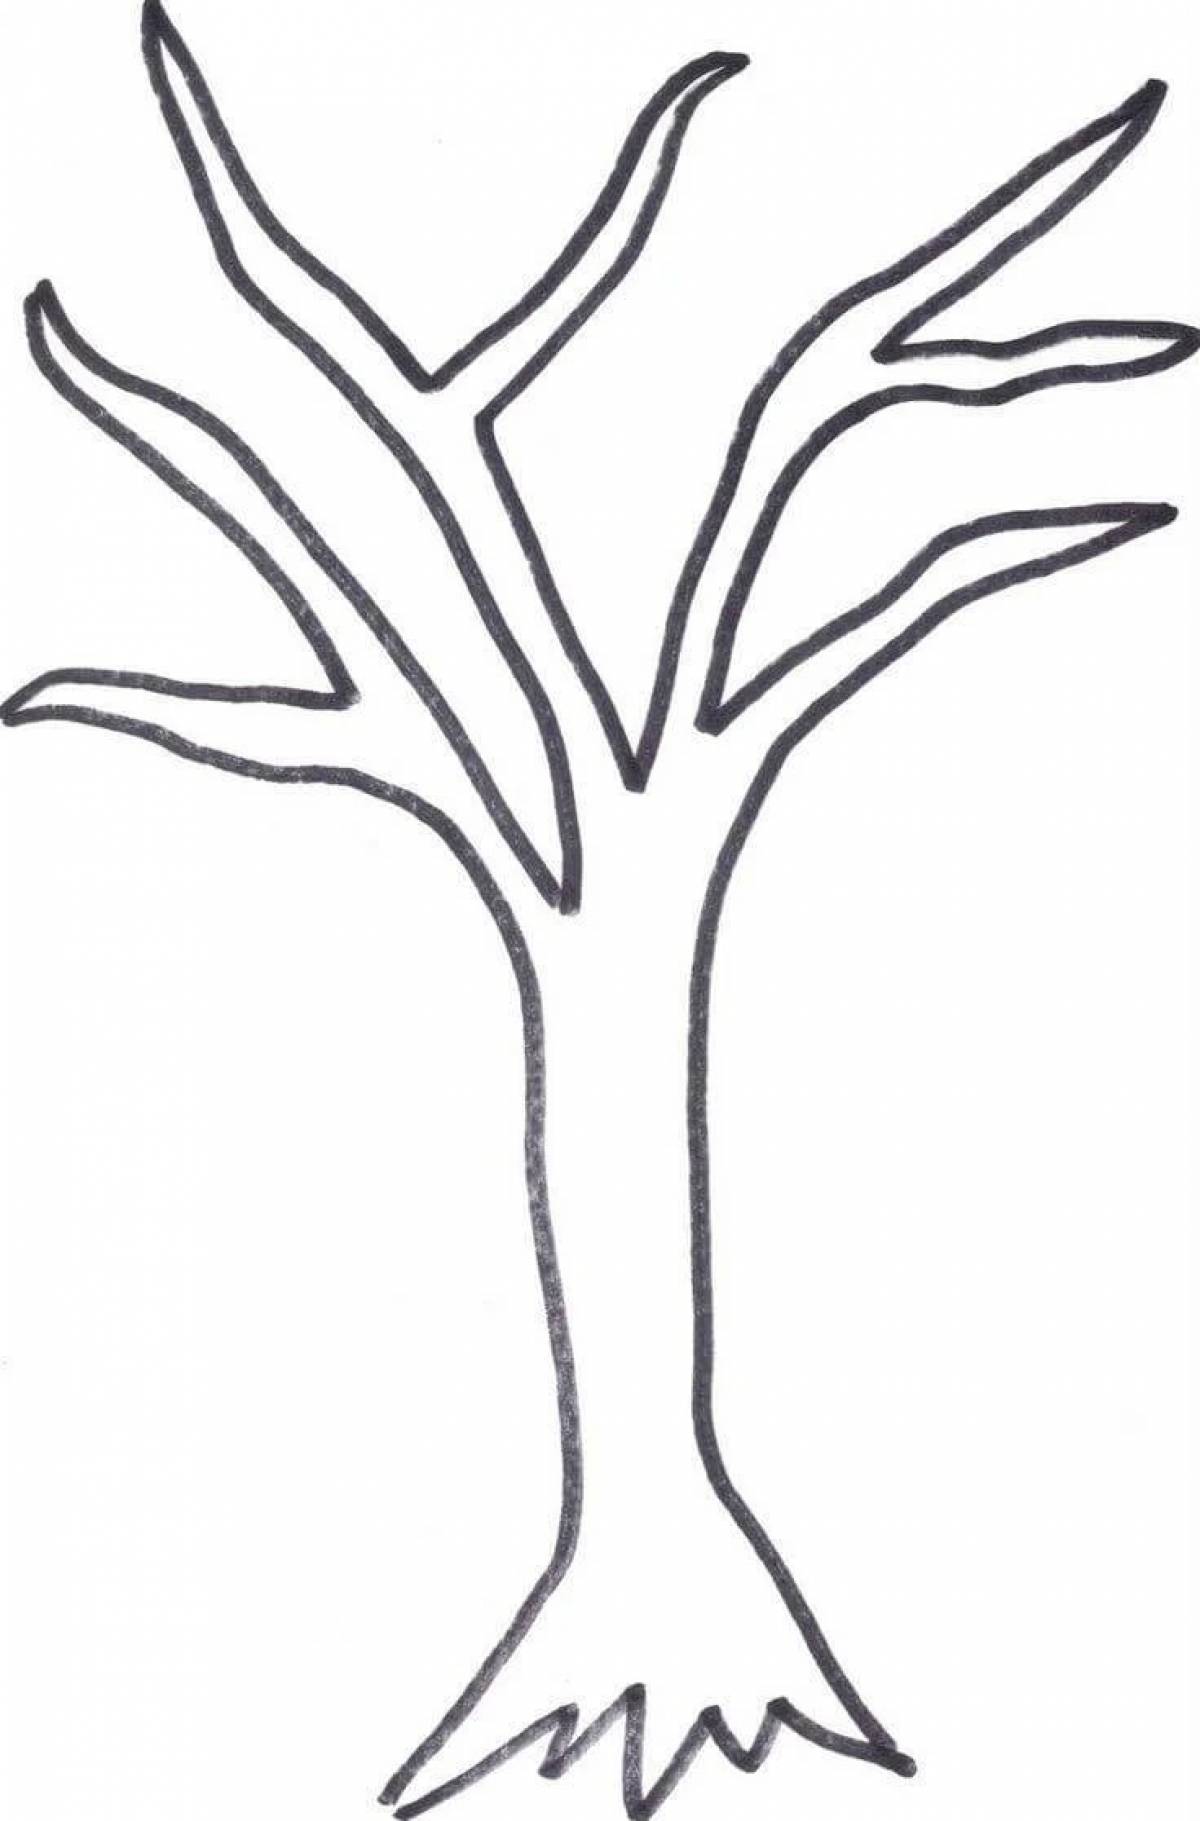 Coloring book cheerful tree trunk without leaves